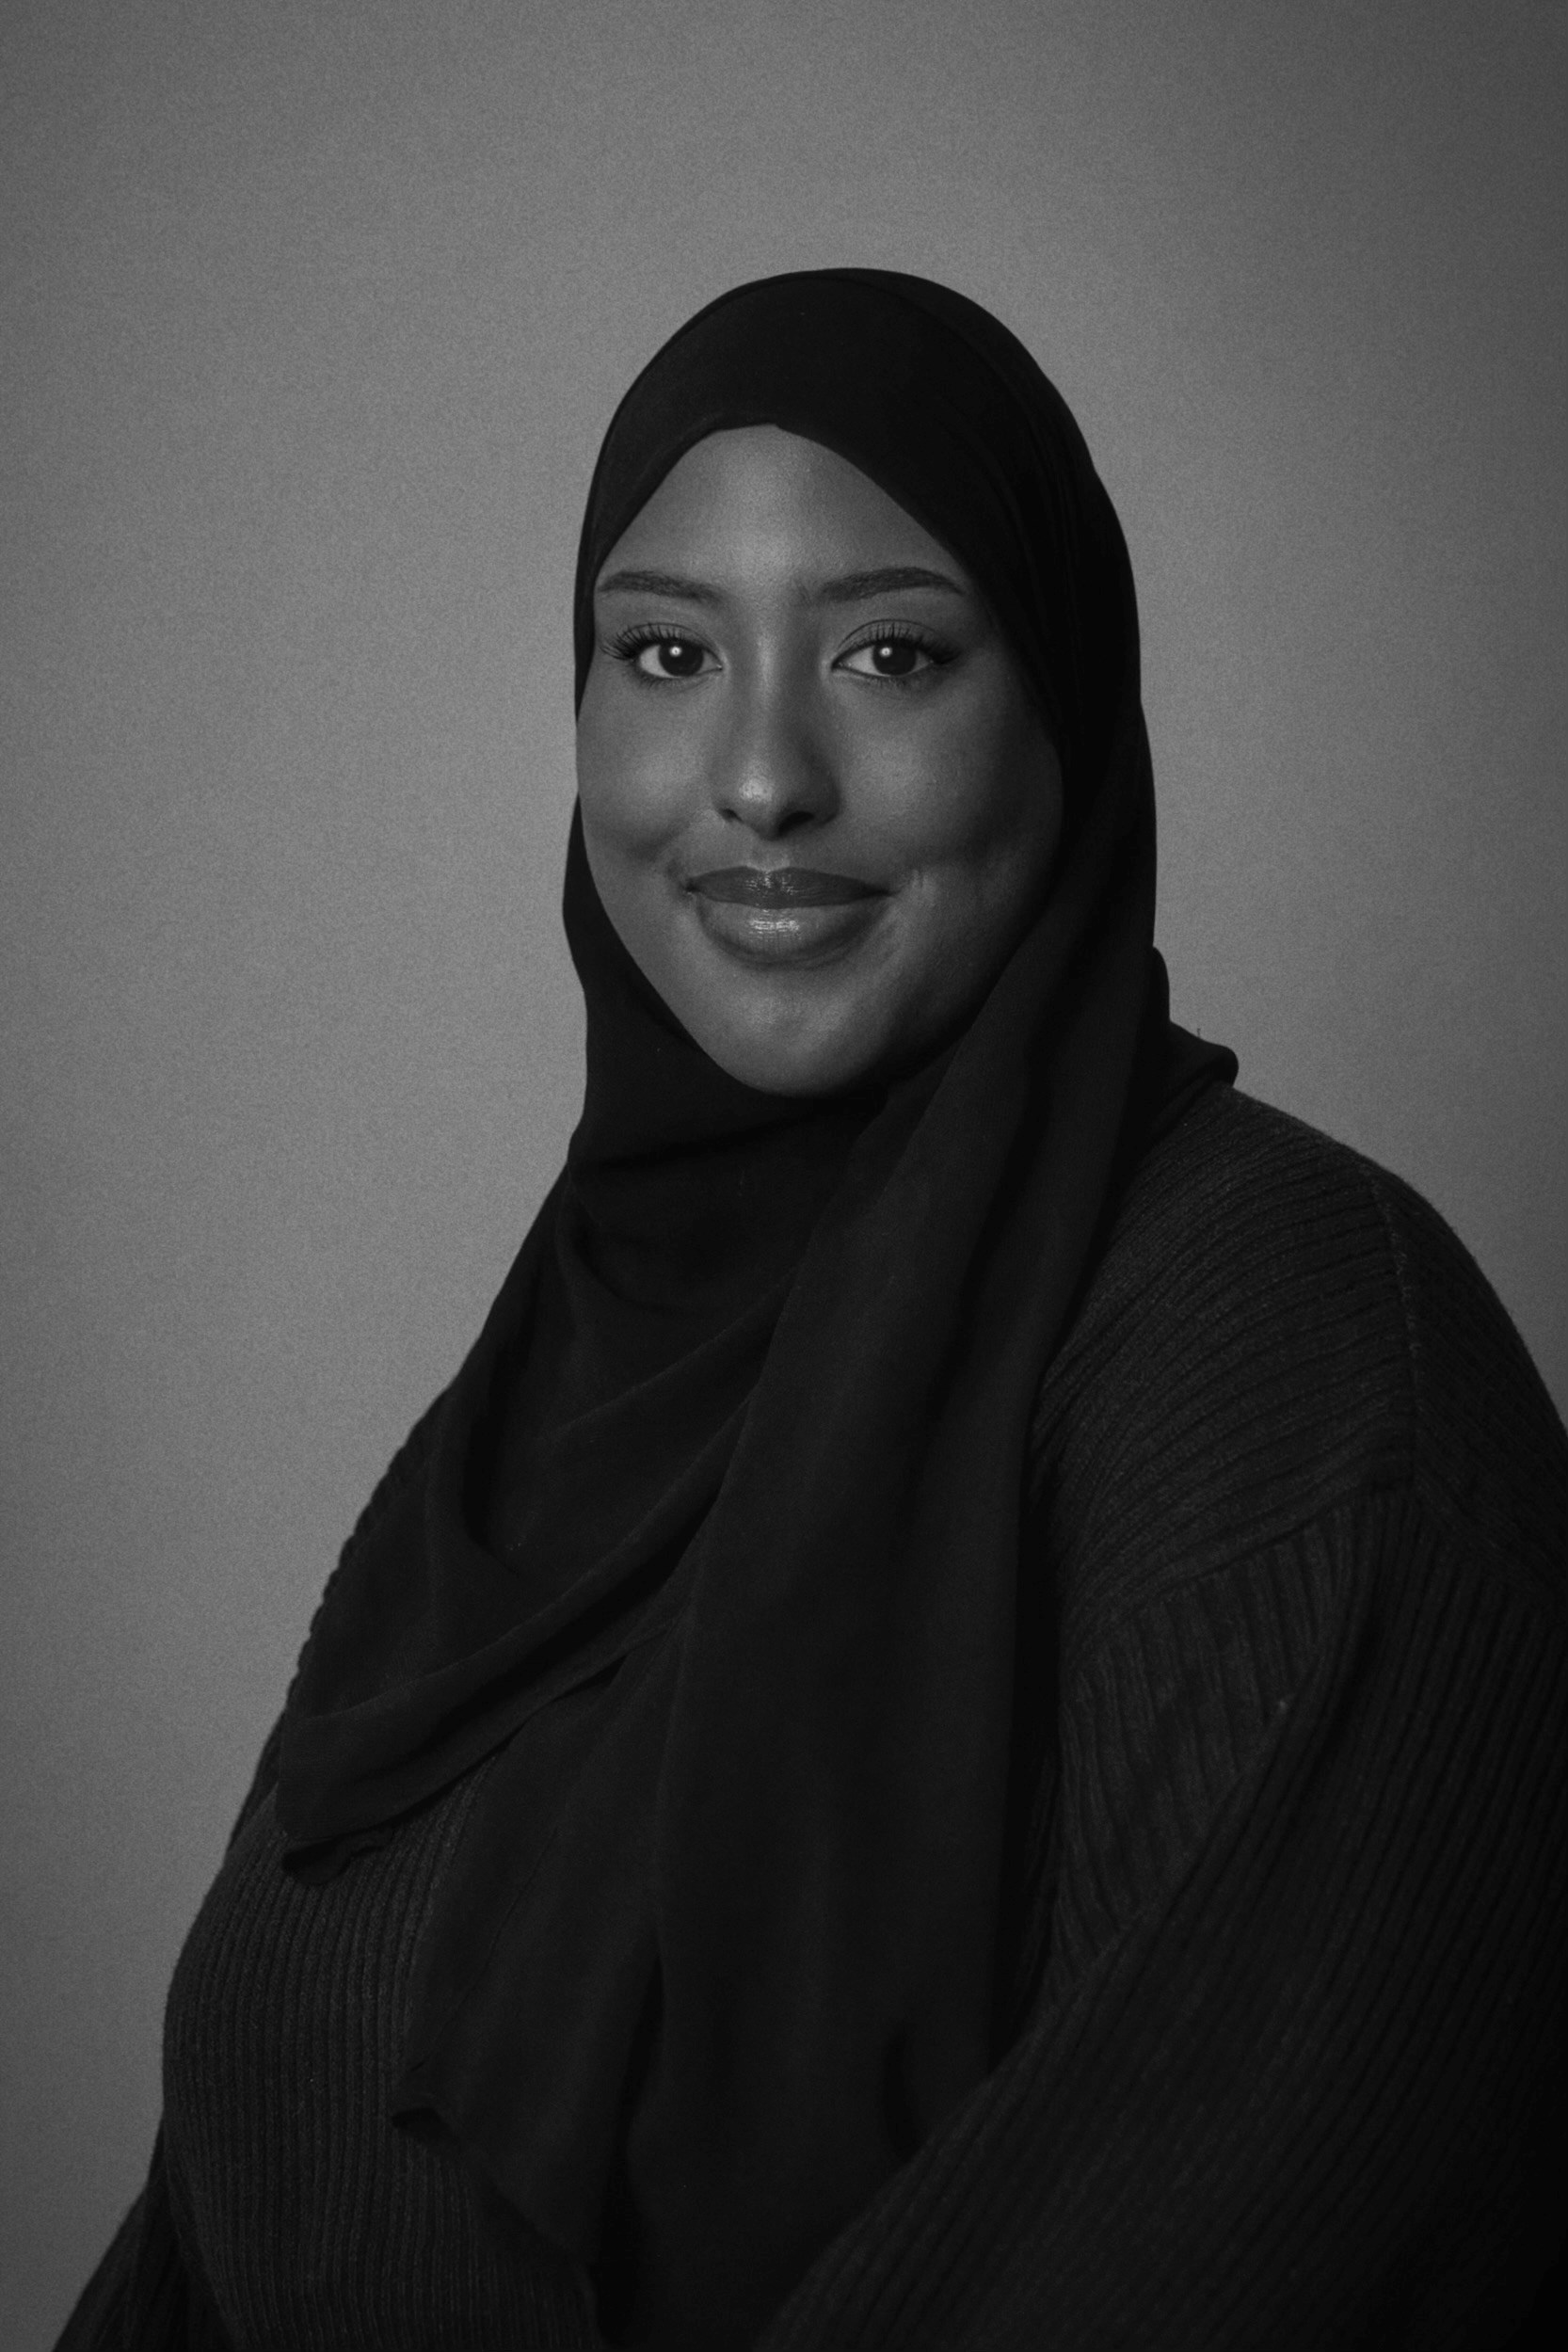 A headshot featuring a woman of color wearing a hijab and facing the camera